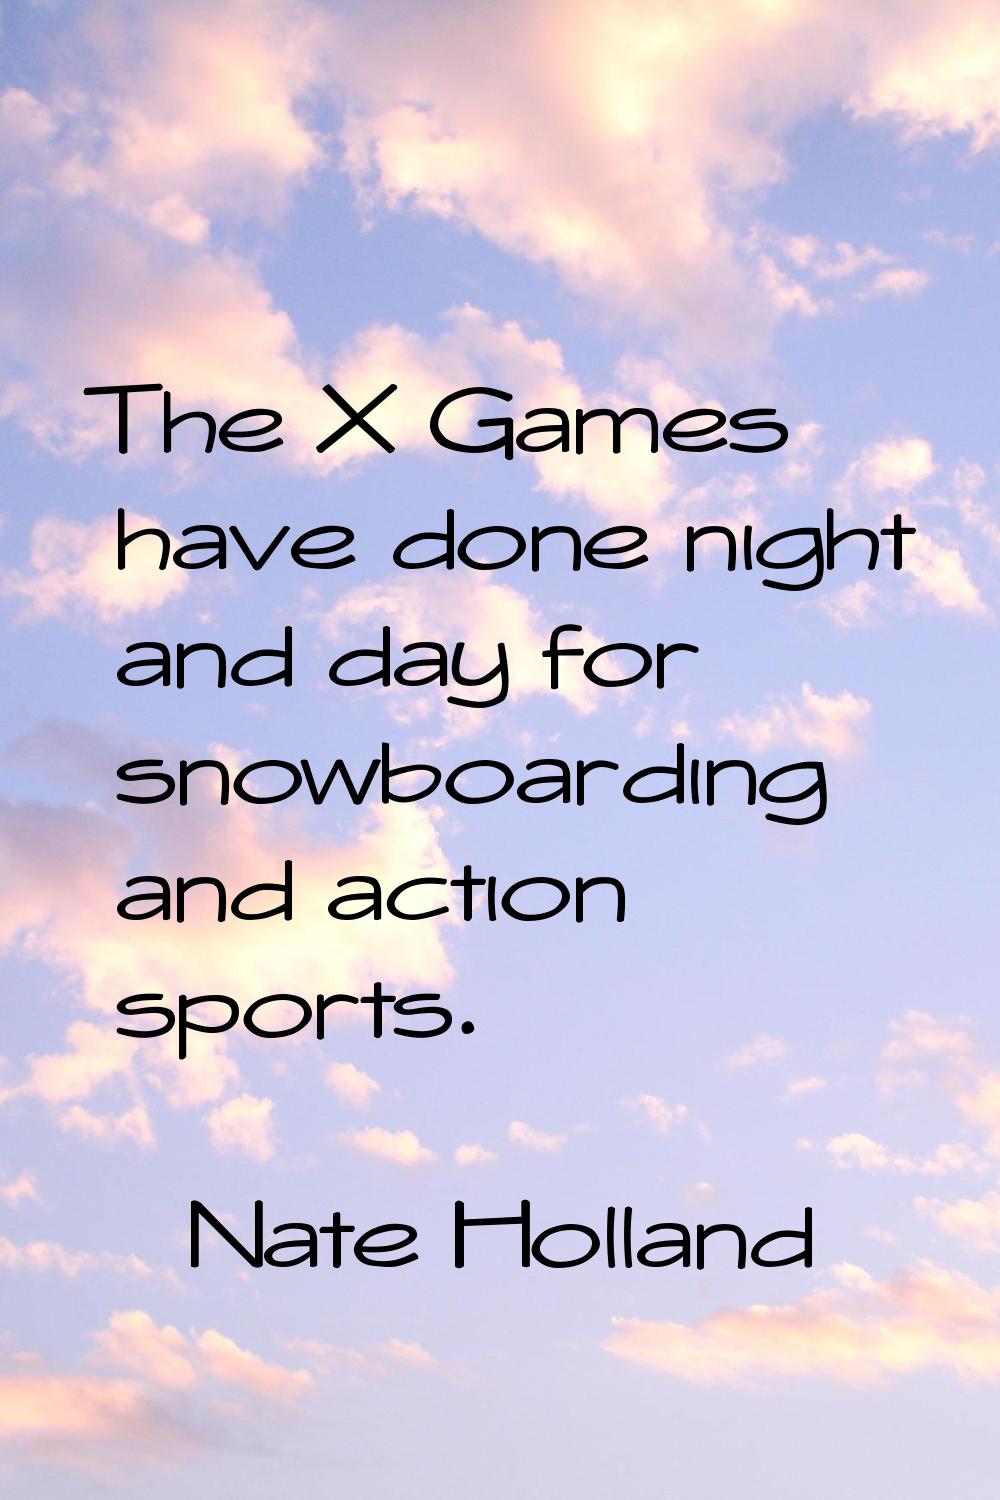 The X Games have done night and day for snowboarding and action sports.